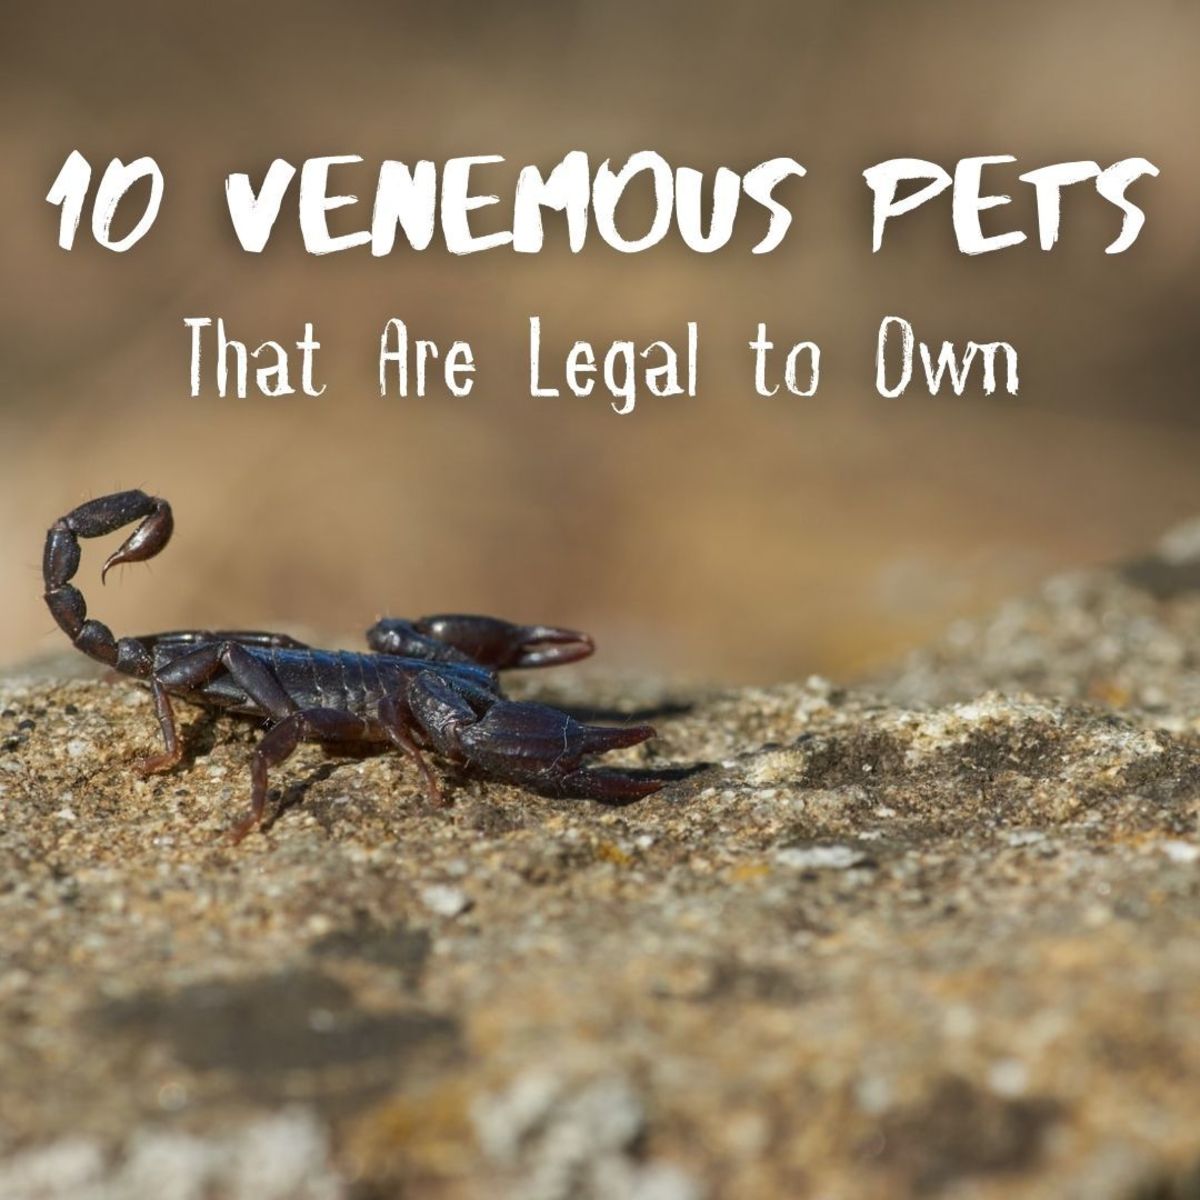 Aside from deadly species of venomous snakes however, most other venomous animals that are legal to keep as pets are not as dangerous as people think.